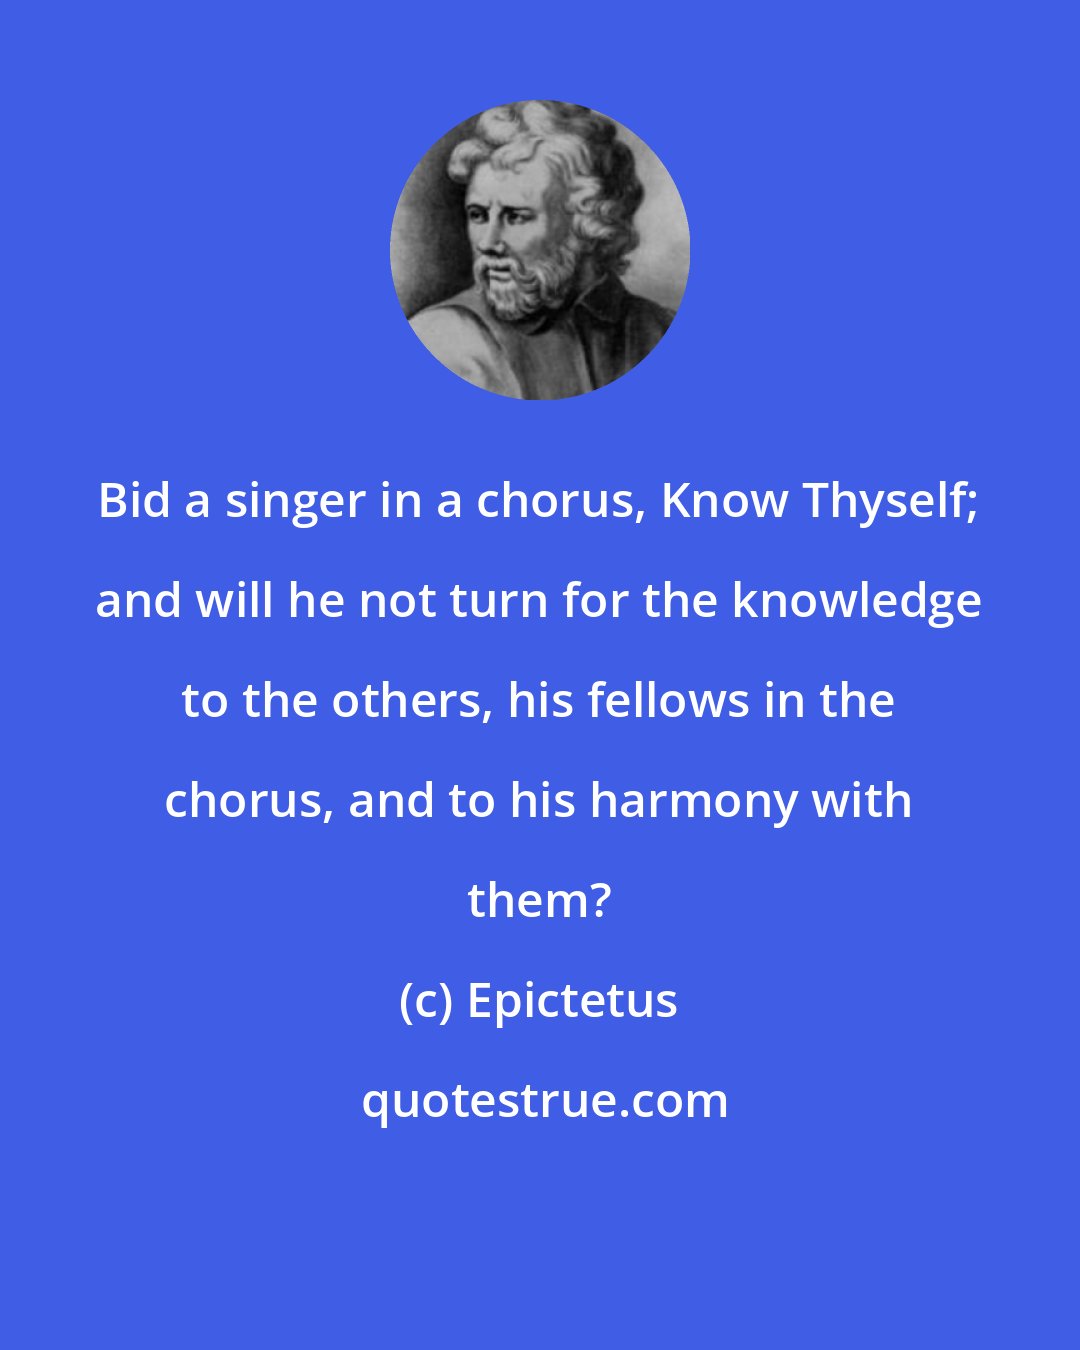 Epictetus: Bid a singer in a chorus, Know Thyself; and will he not turn for the knowledge to the others, his fellows in the chorus, and to his harmony with them?